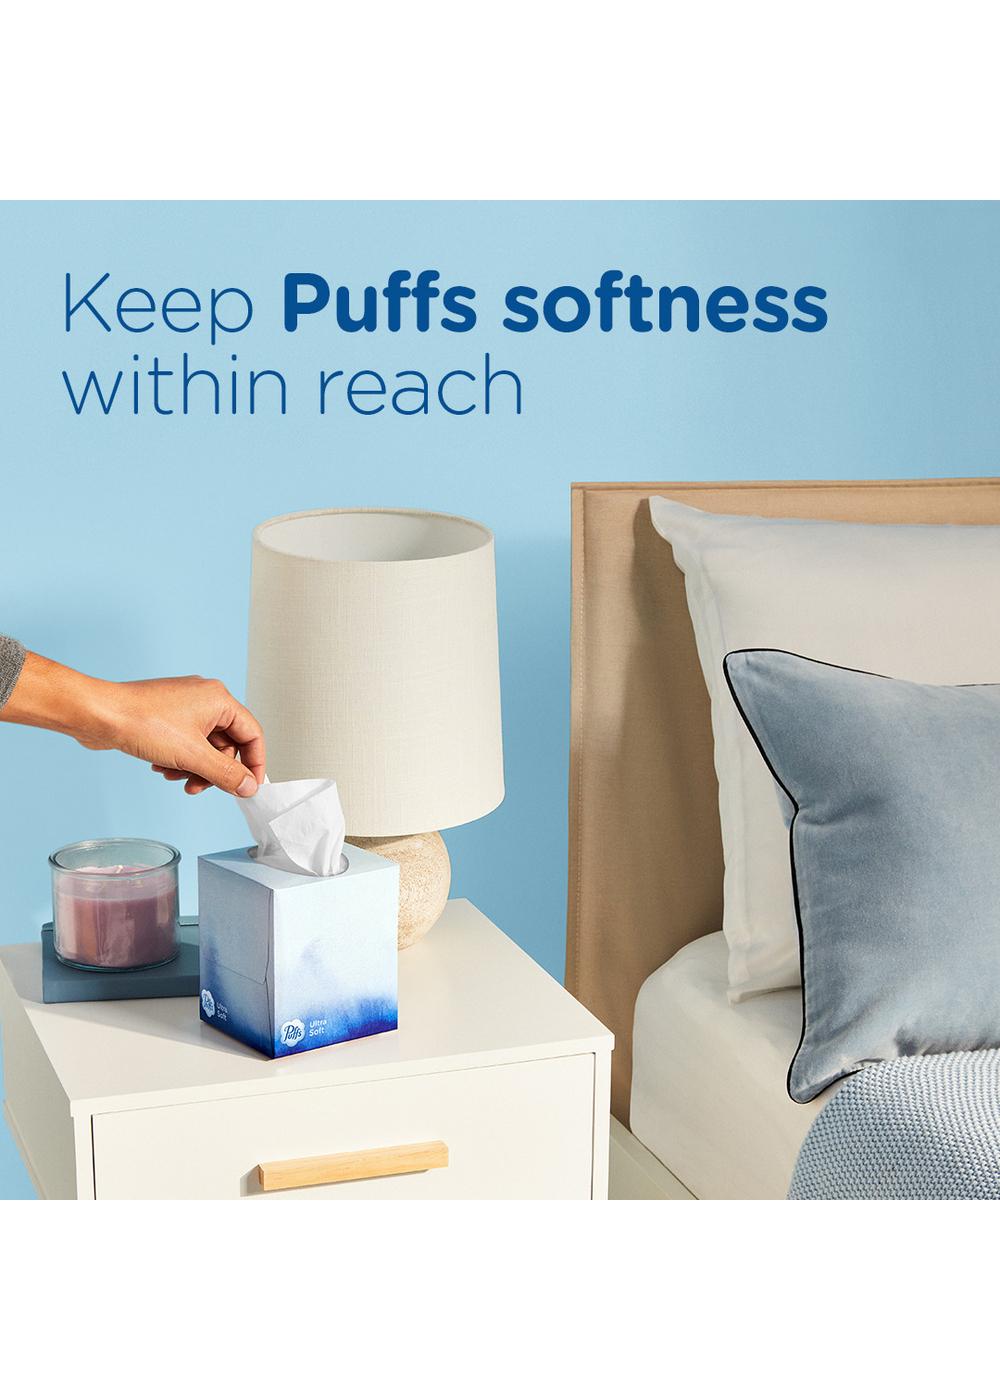 Puffs Ultra Soft Facial Tissues; image 6 of 10